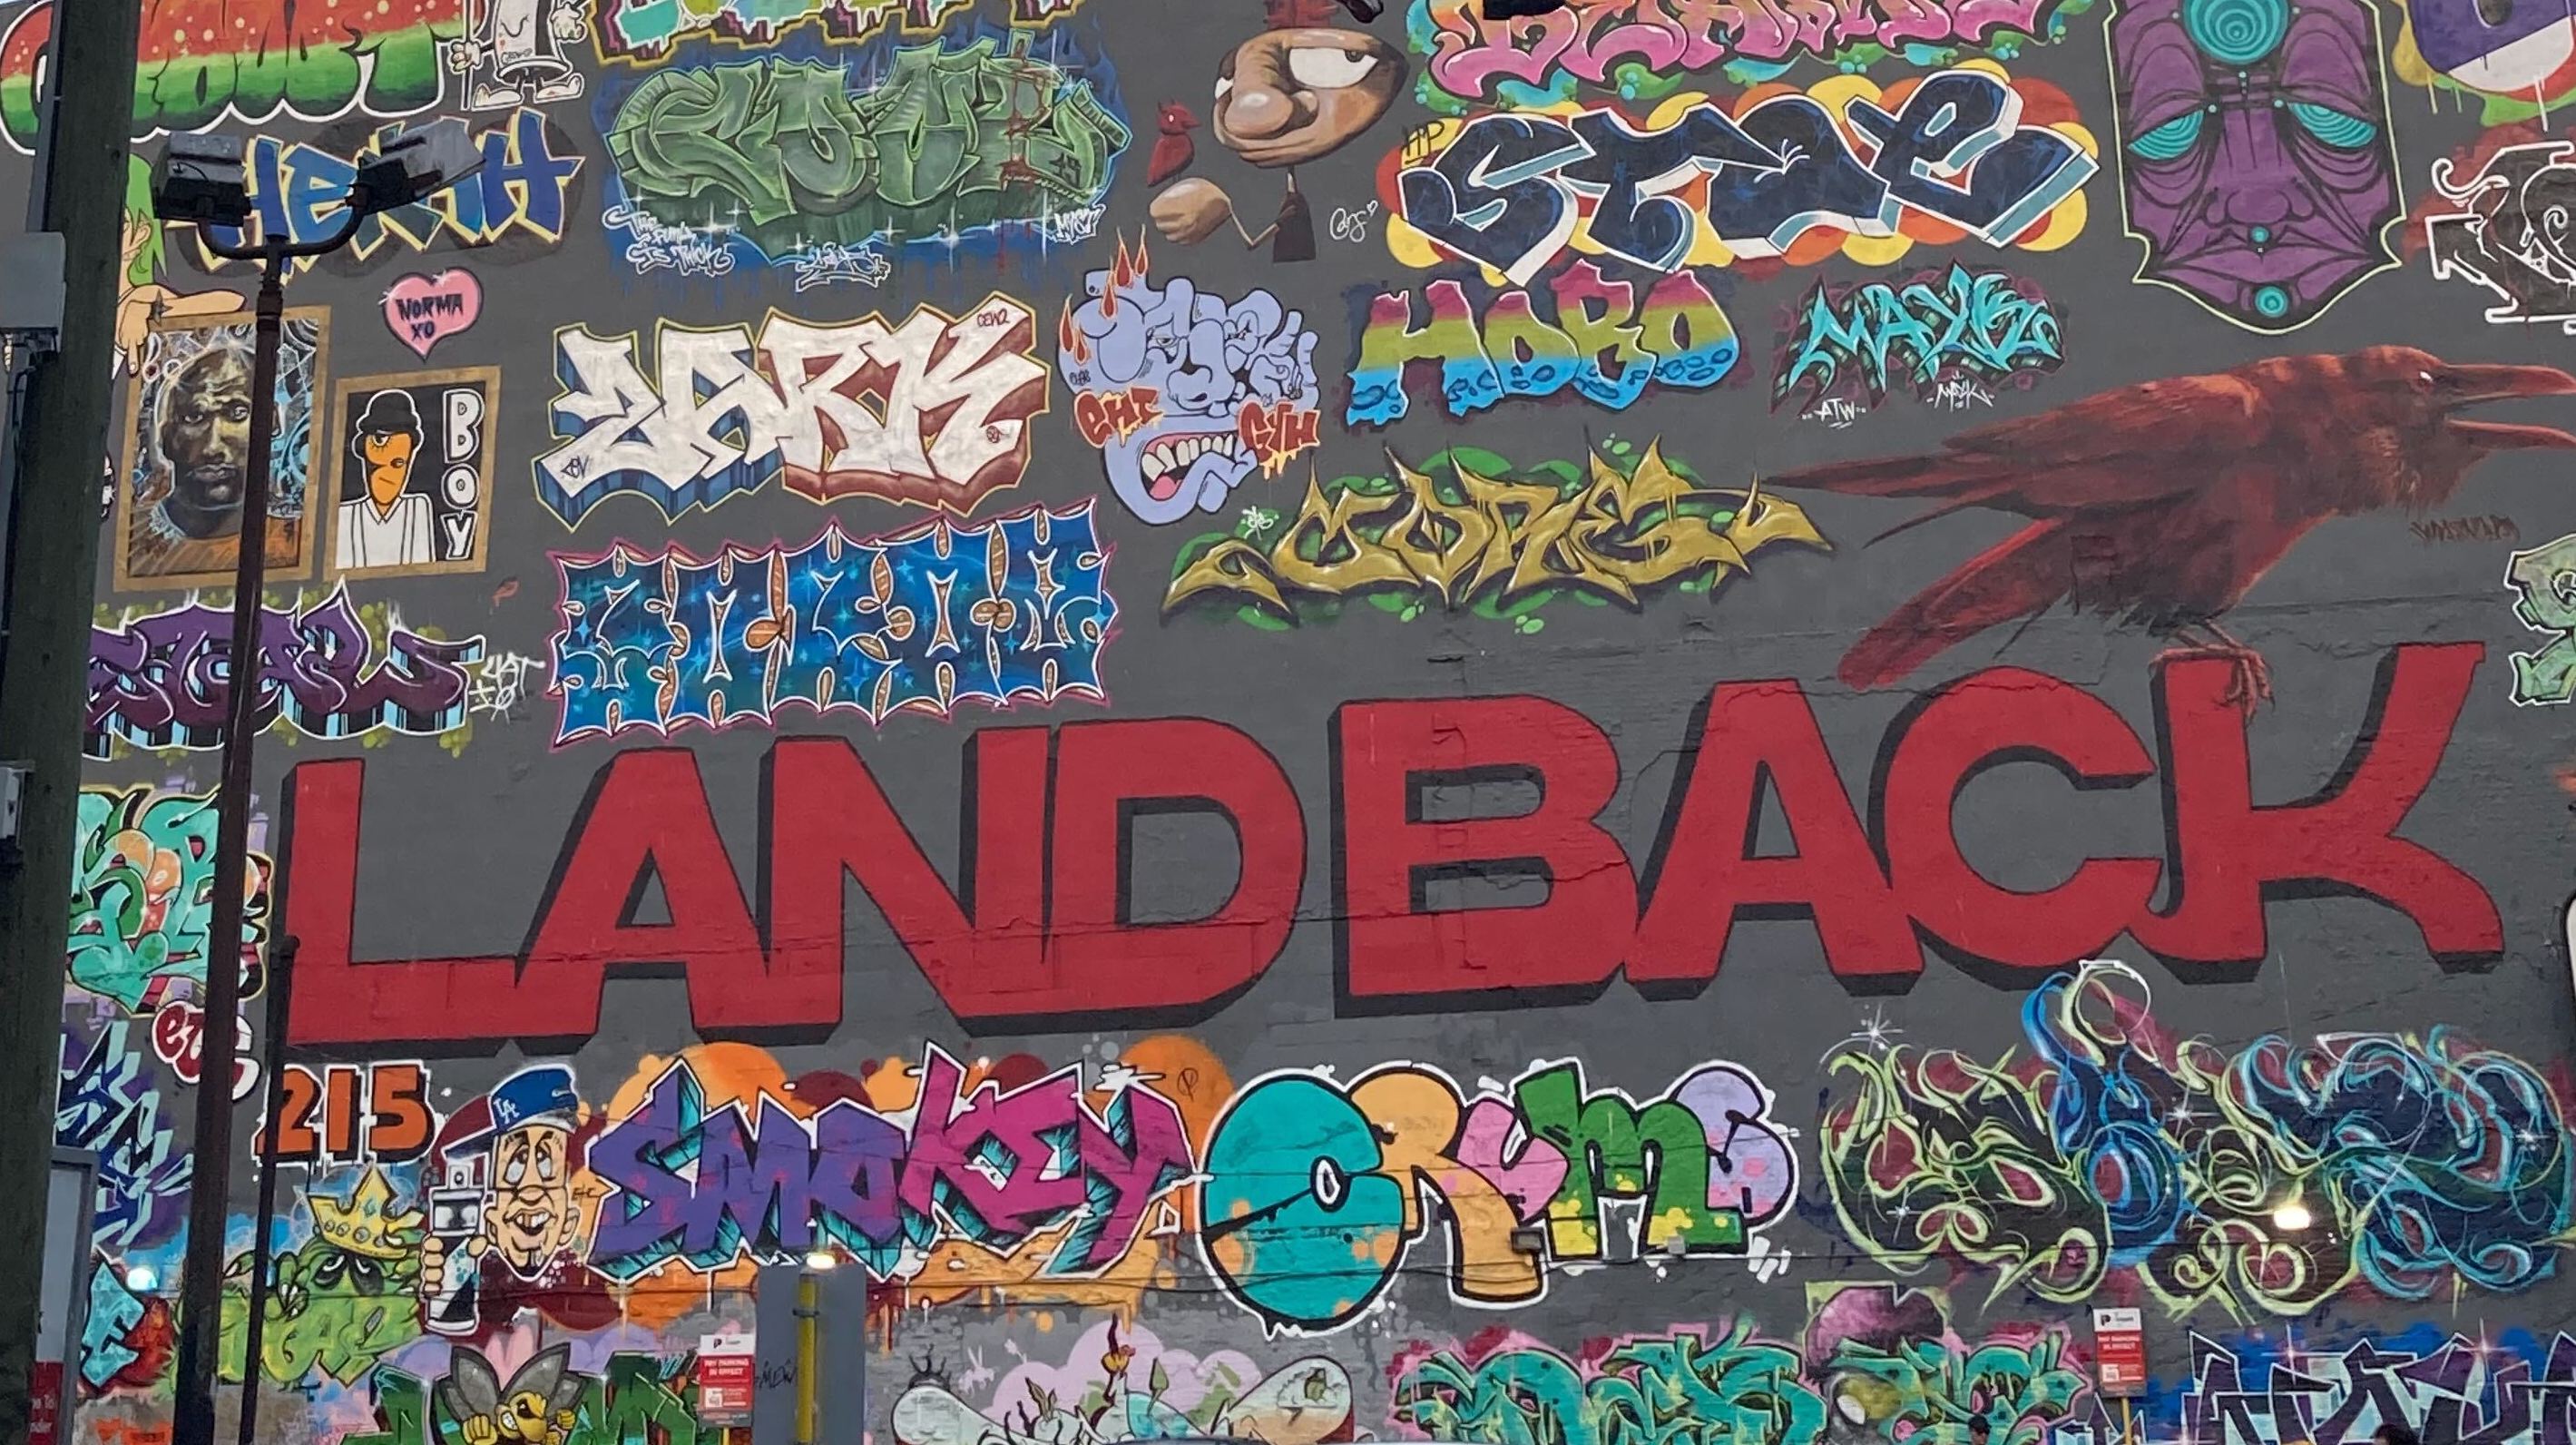 A large-format graffiti mural features numerous colourful tags from local artists unified by the words “LAND BACK” in large sans-serif lettering in red. The main lettering and surrounding colourful tags are on a grey charcoal painted wall.